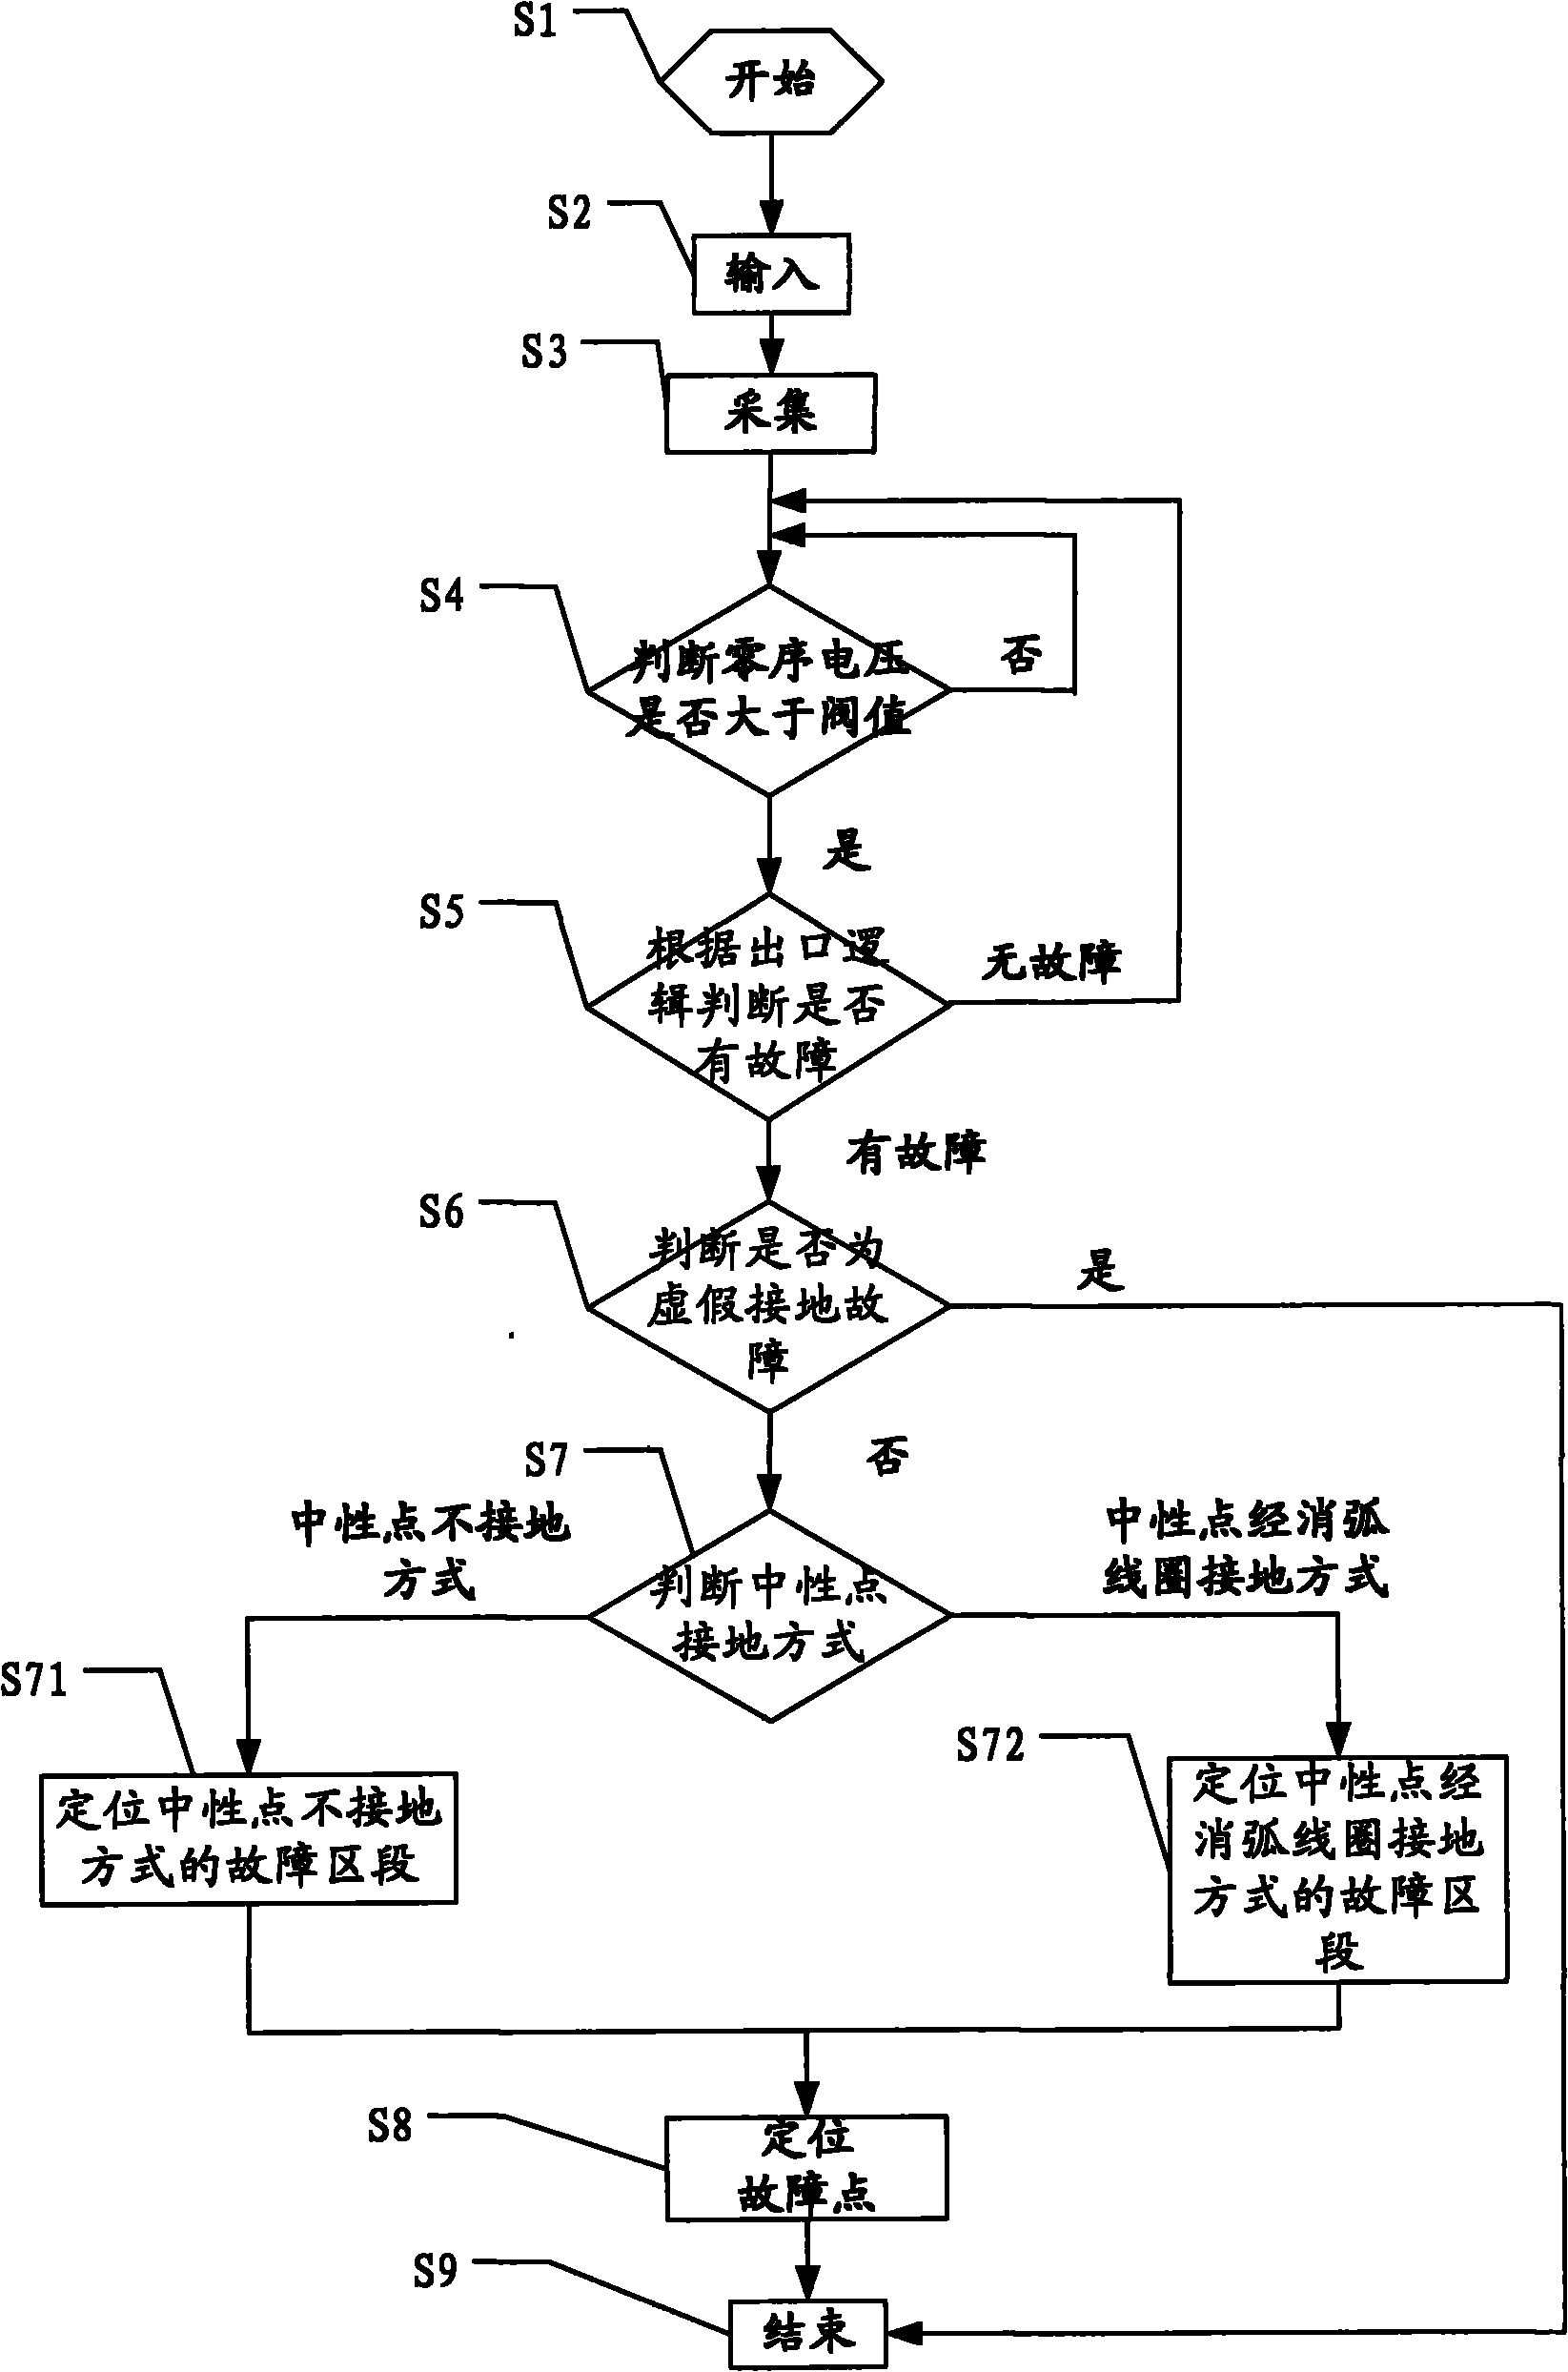 System and method for positioning medium voltage distribution network using power line carrier communication